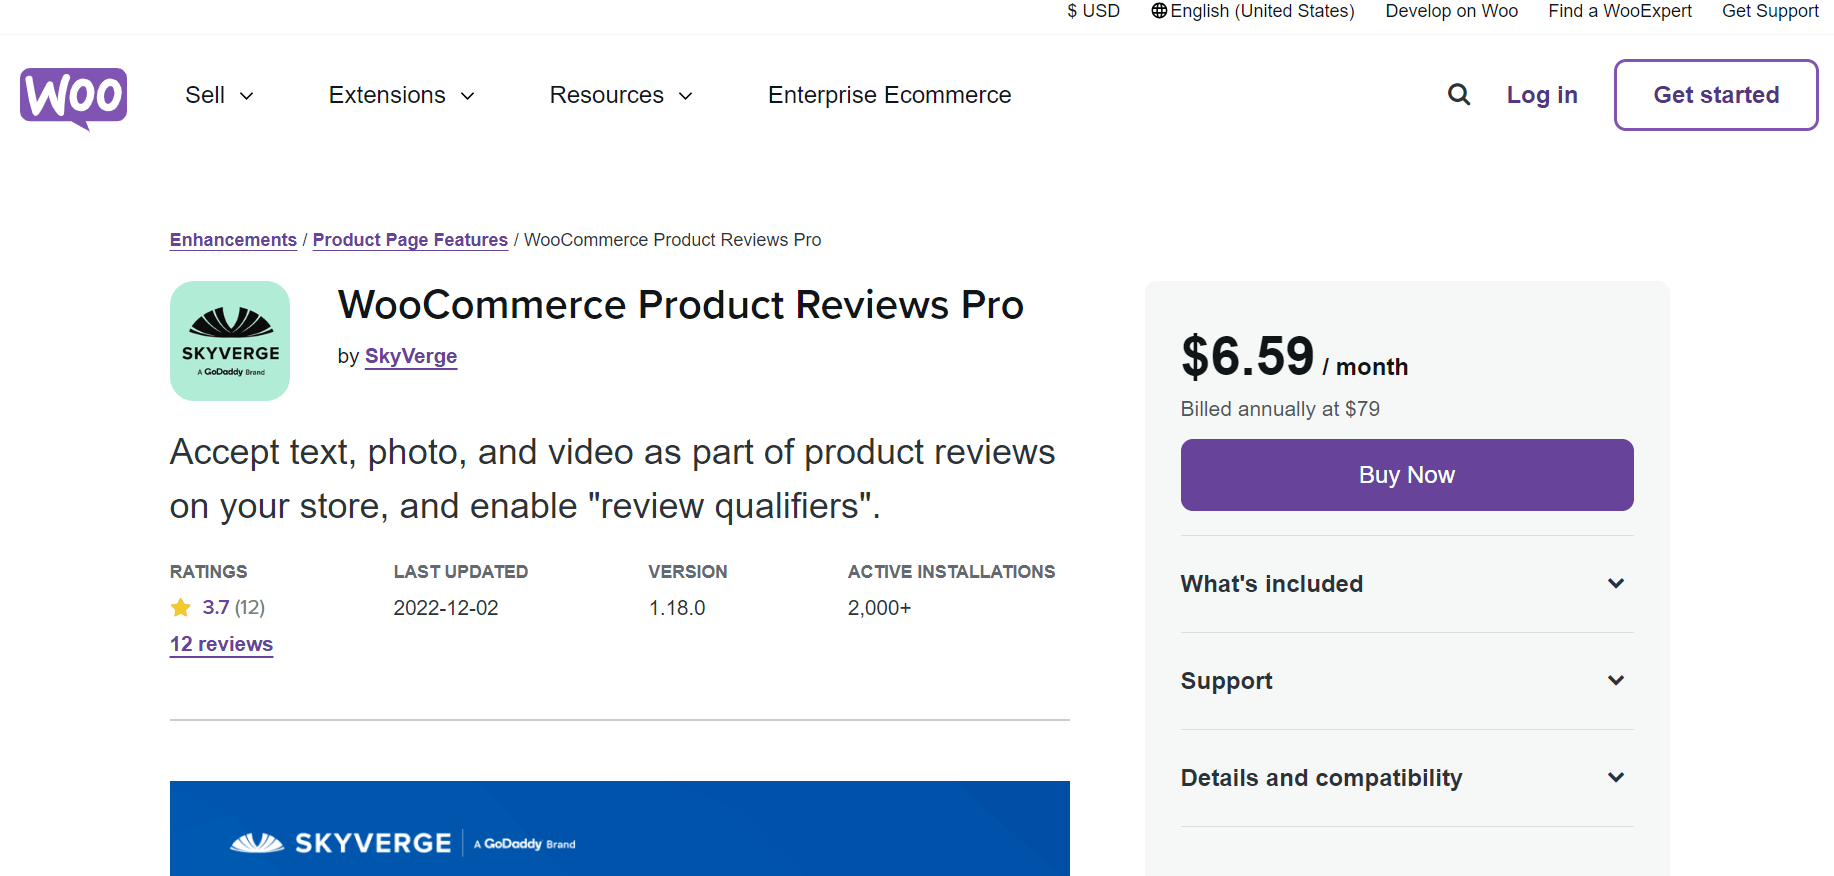 WooCommerce Product Reviews Pro is one popular product reviews plugin for WooCommerce